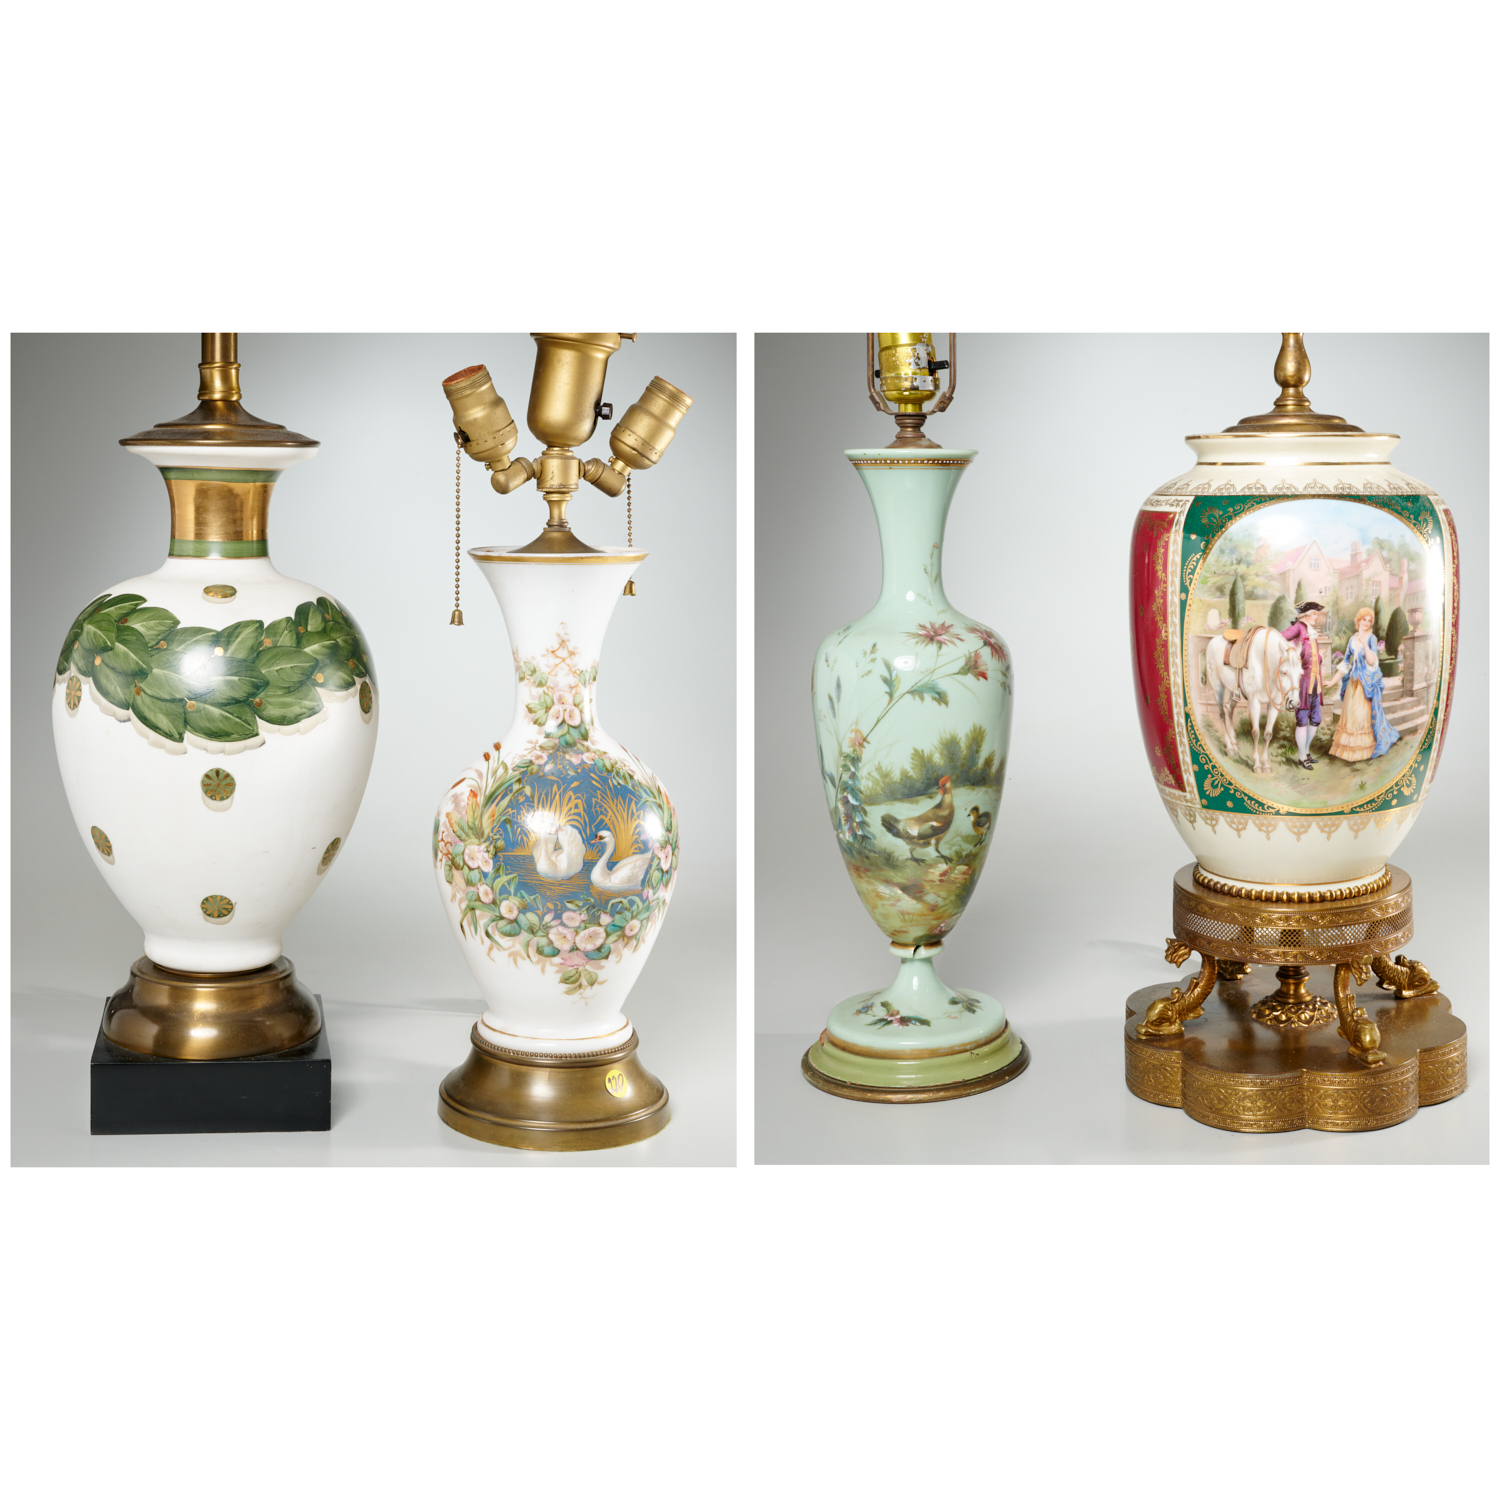  4 DECORATED GLASS AND PORCELAIN 361882